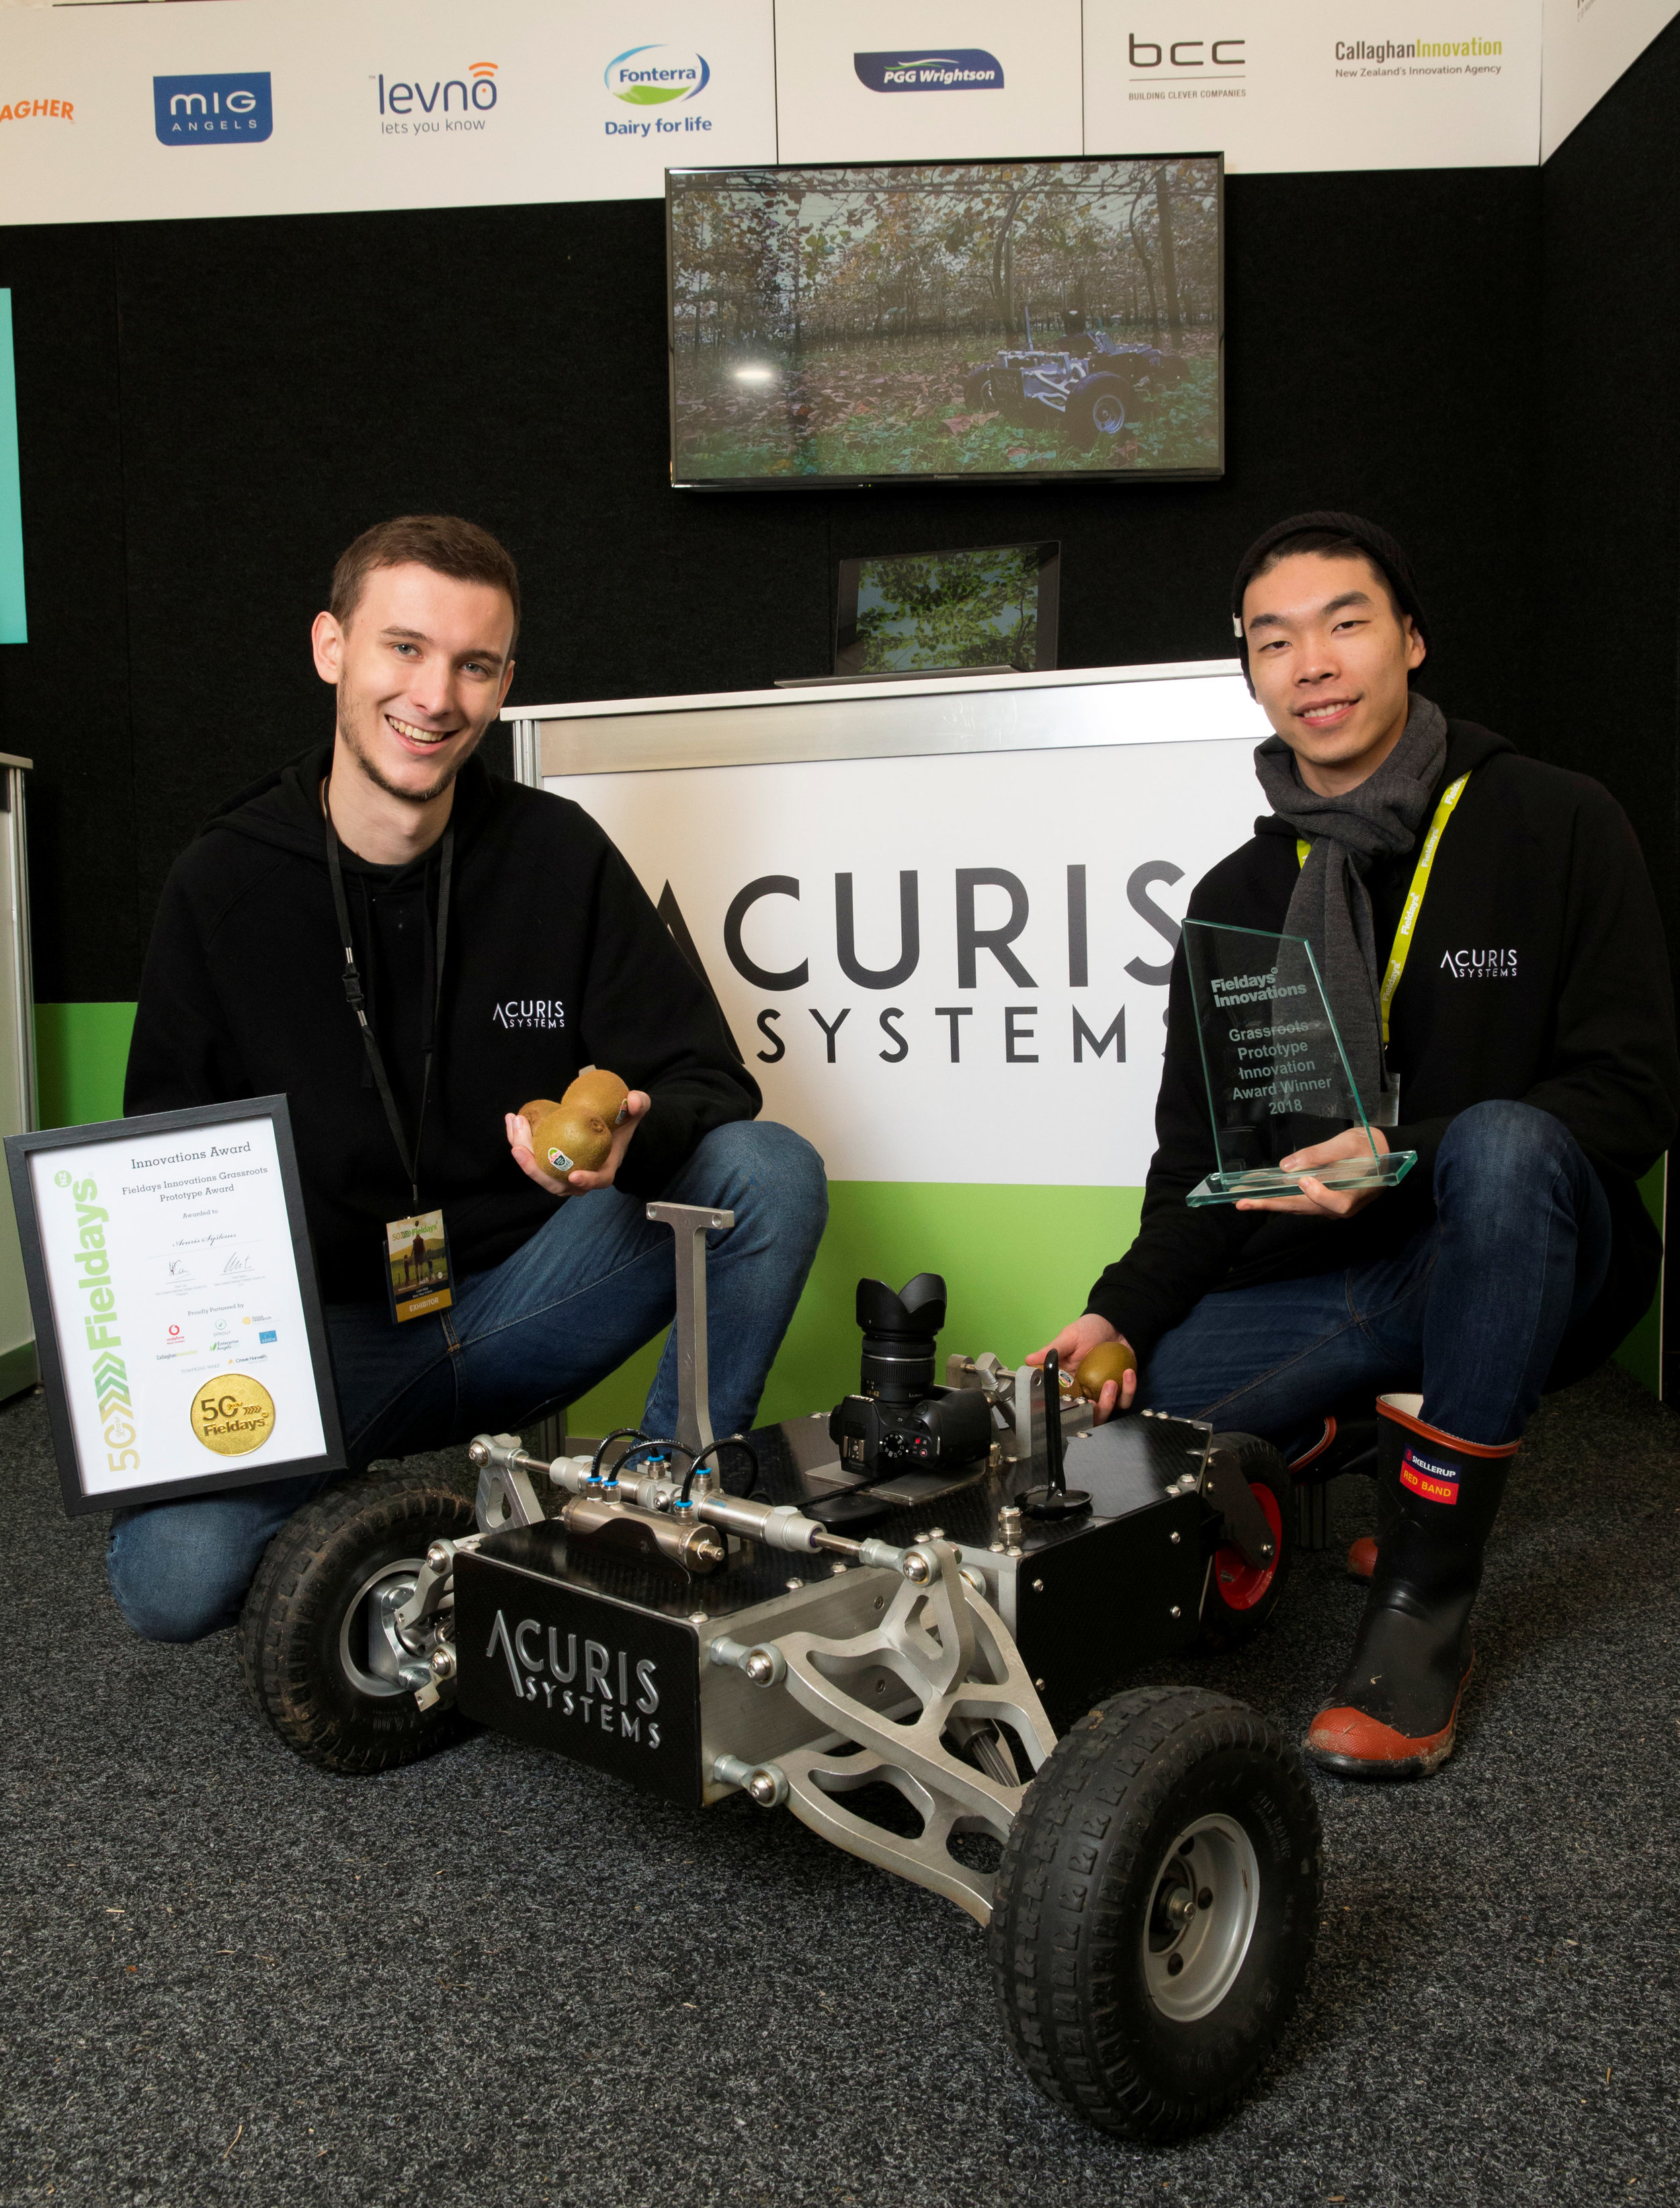 2018 Fieldays Grassroots Prototype Award winners Acuris Systems with their prototype robot that autonomously navigates kiwifruit orchards while capturing highly accurate fruit data. This data is then analysed to provide growers with quality informat…